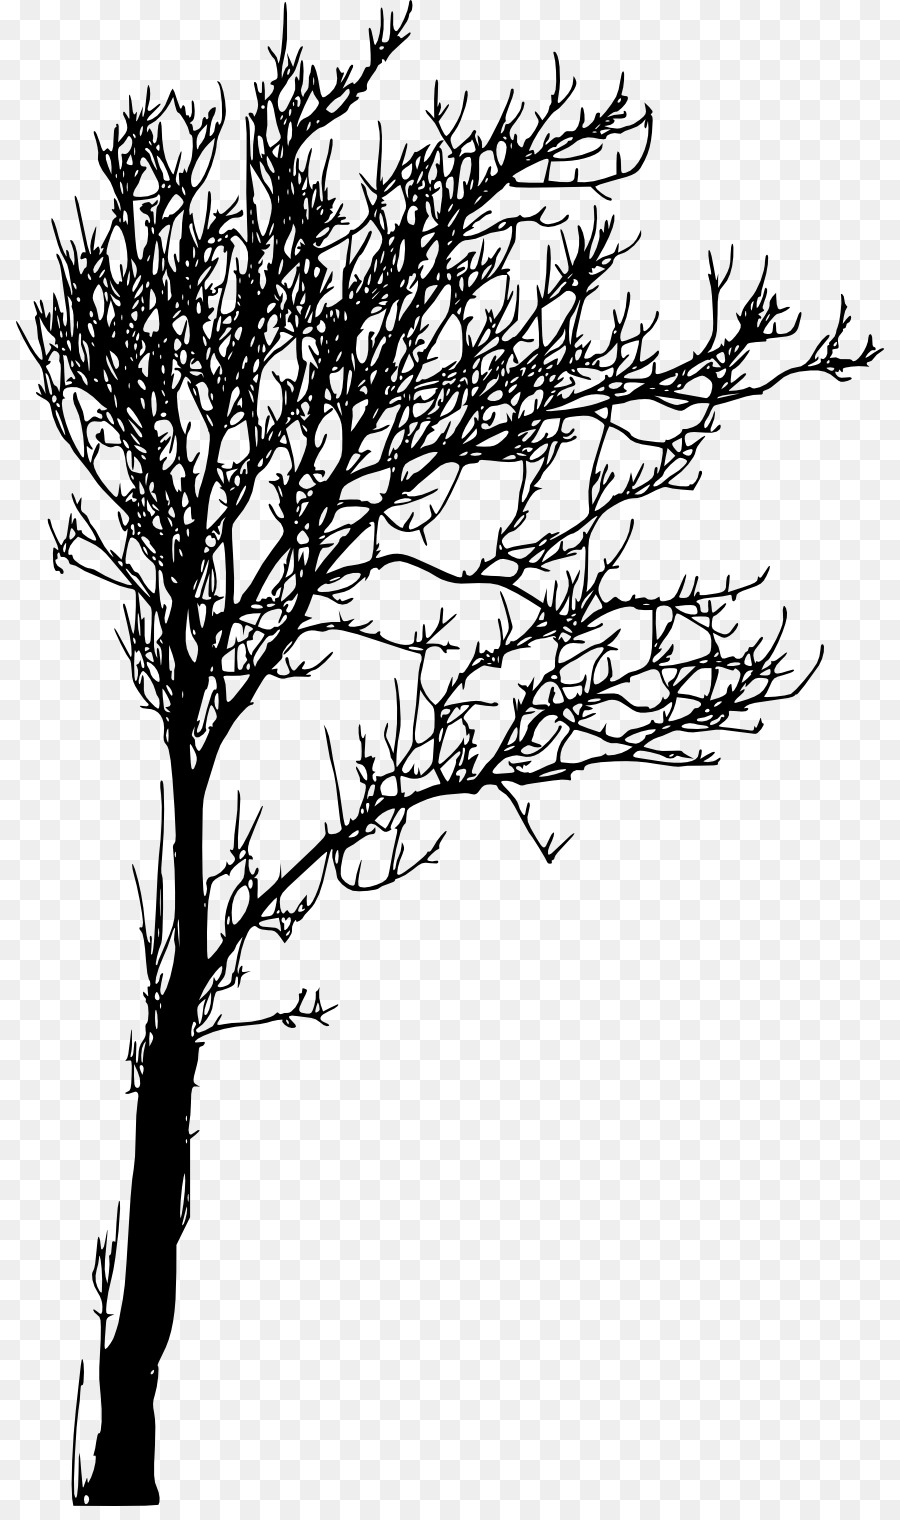 Tree Branch Woody plant Twig Silhouette - tree transparent png download - 868*1506 - Free Transparent Tree png Download.